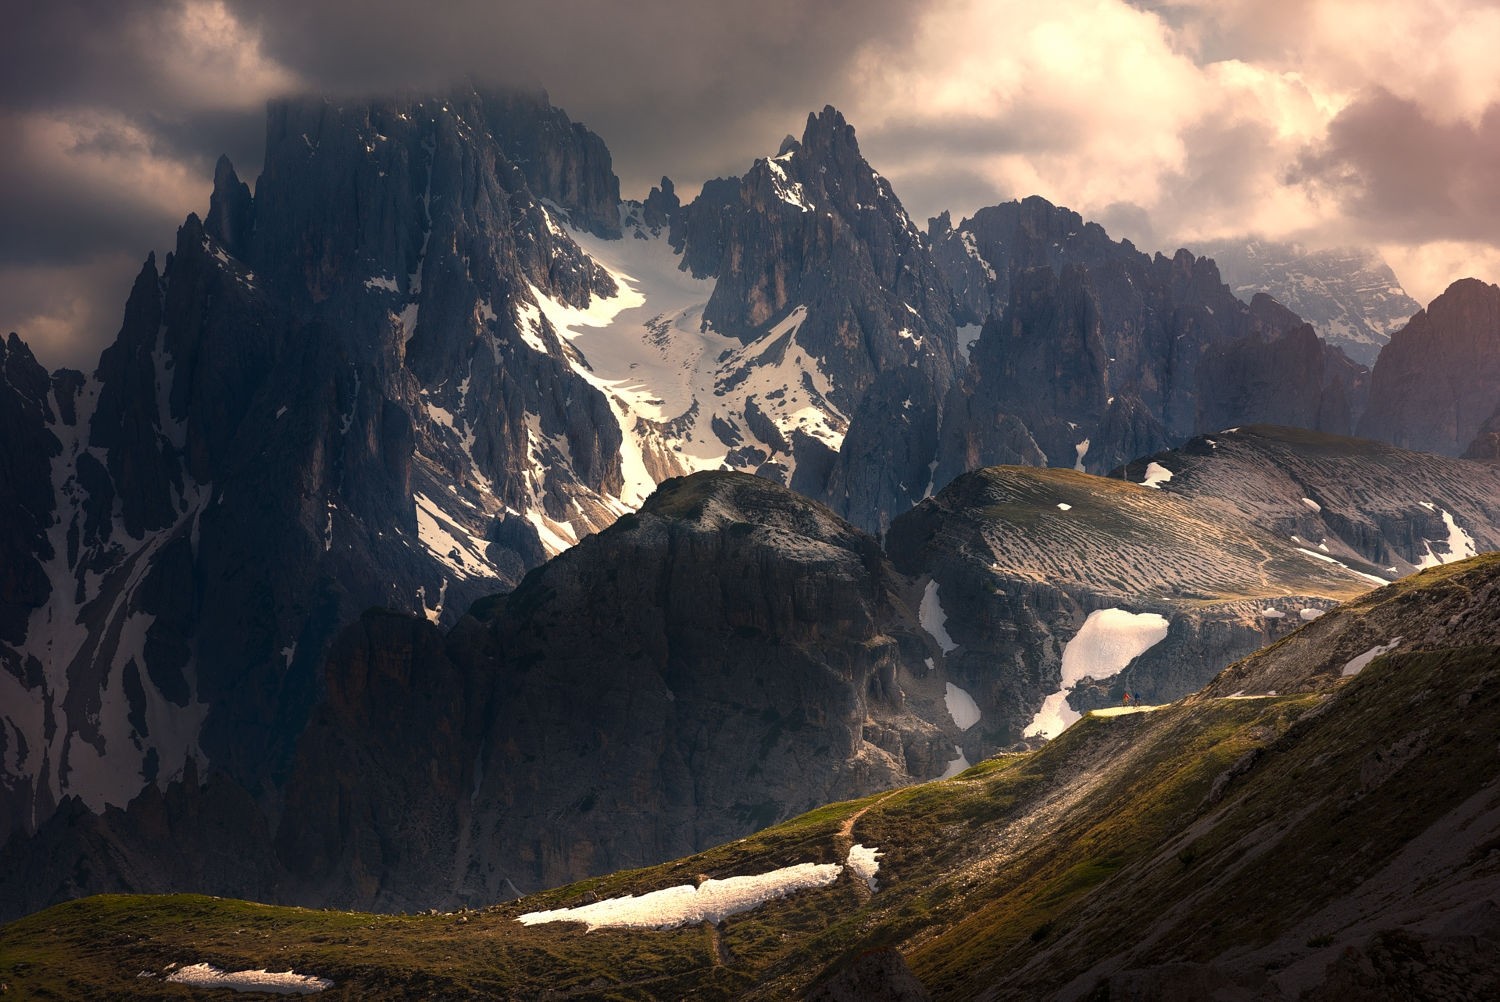 photography, Nature, Landscape, Snow, Clouds, Mountains, Sunlight, Hiking, Dolomites (mountains), Italy Wallpaper